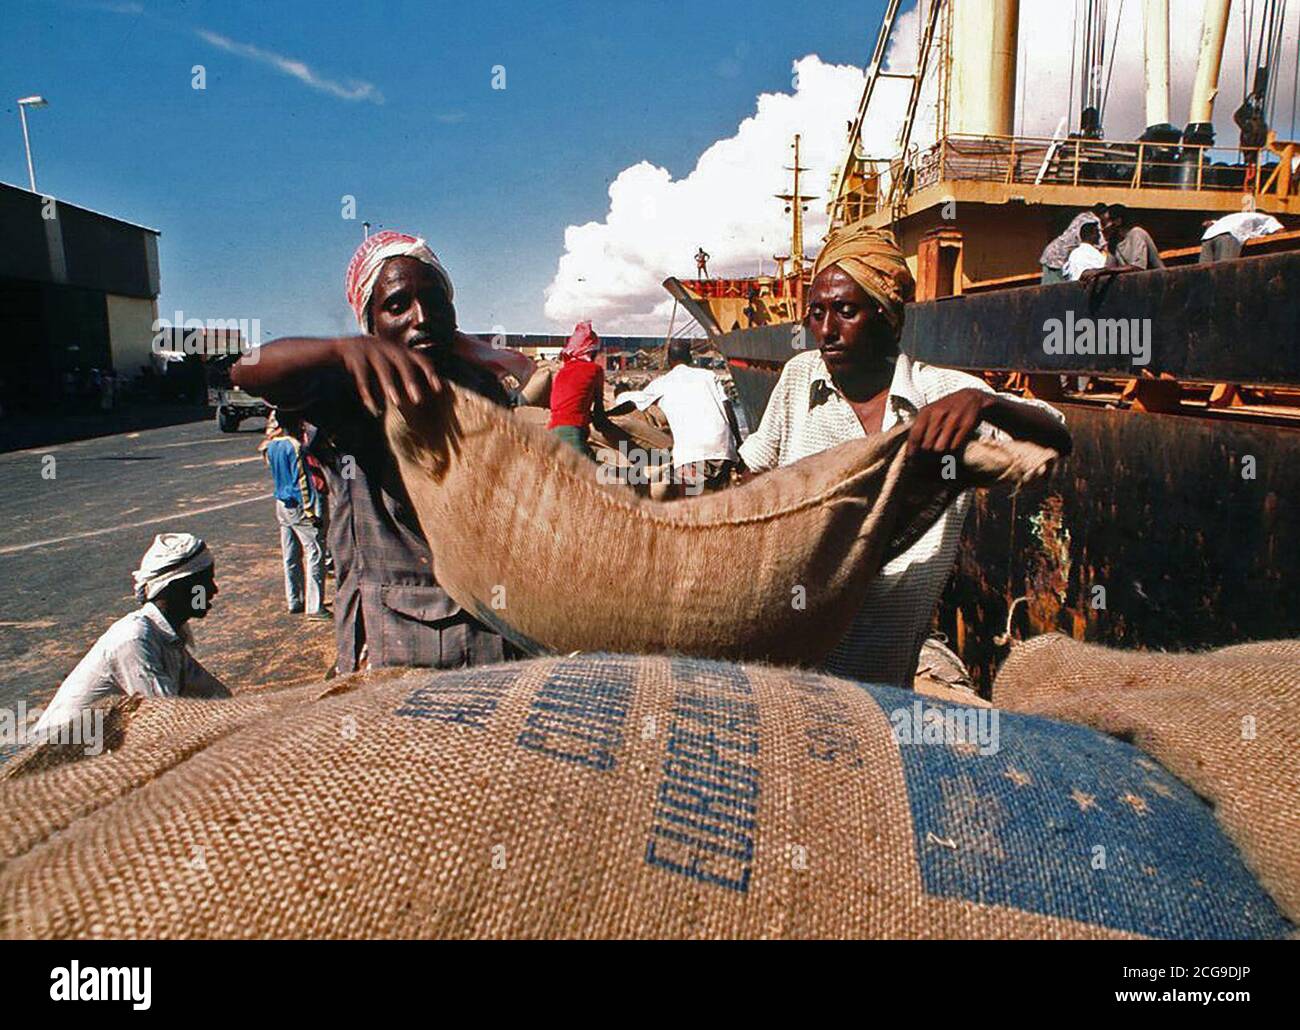 1993 - Somali dock workers carry sacks of wheat in the port as they unload relief supplies for their country. (Mogadishu Somalia) Stock Photo